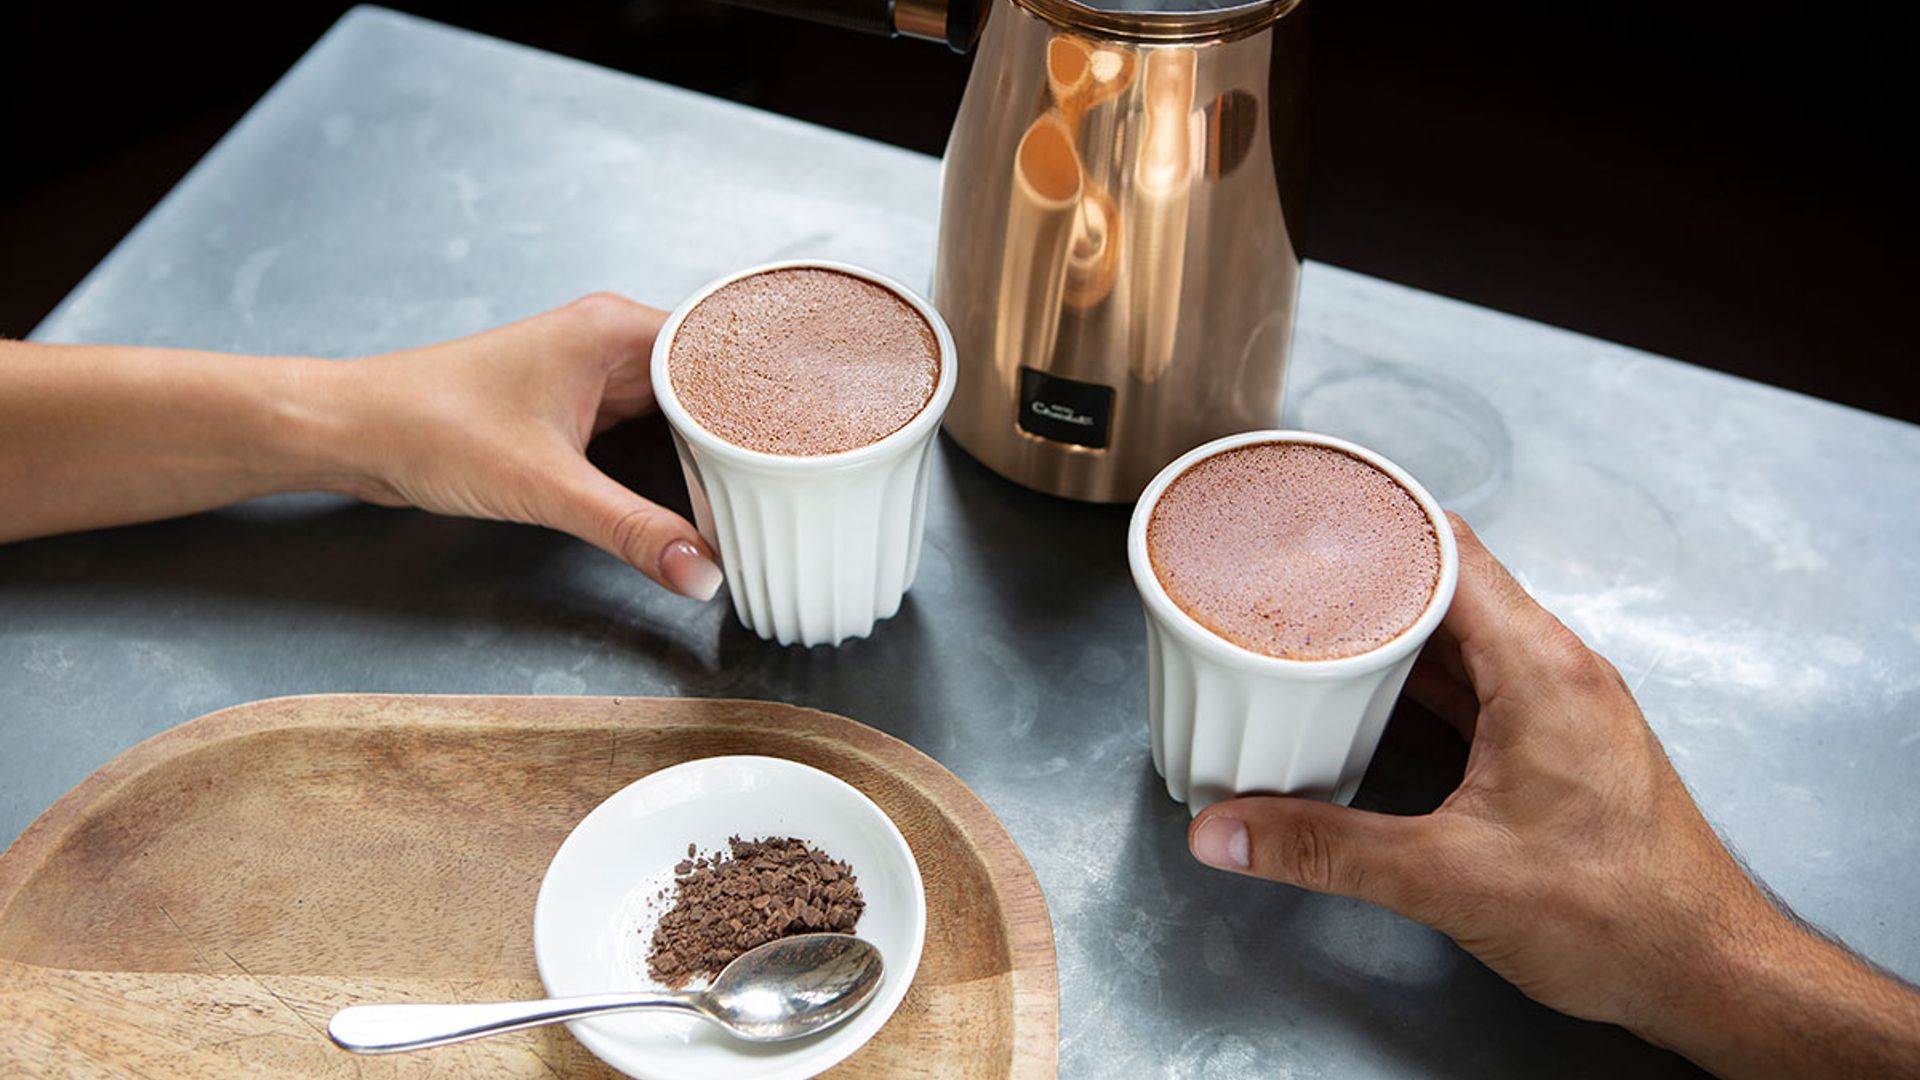 Christmas shoppers won’t stop raving about this hot chocolate machine